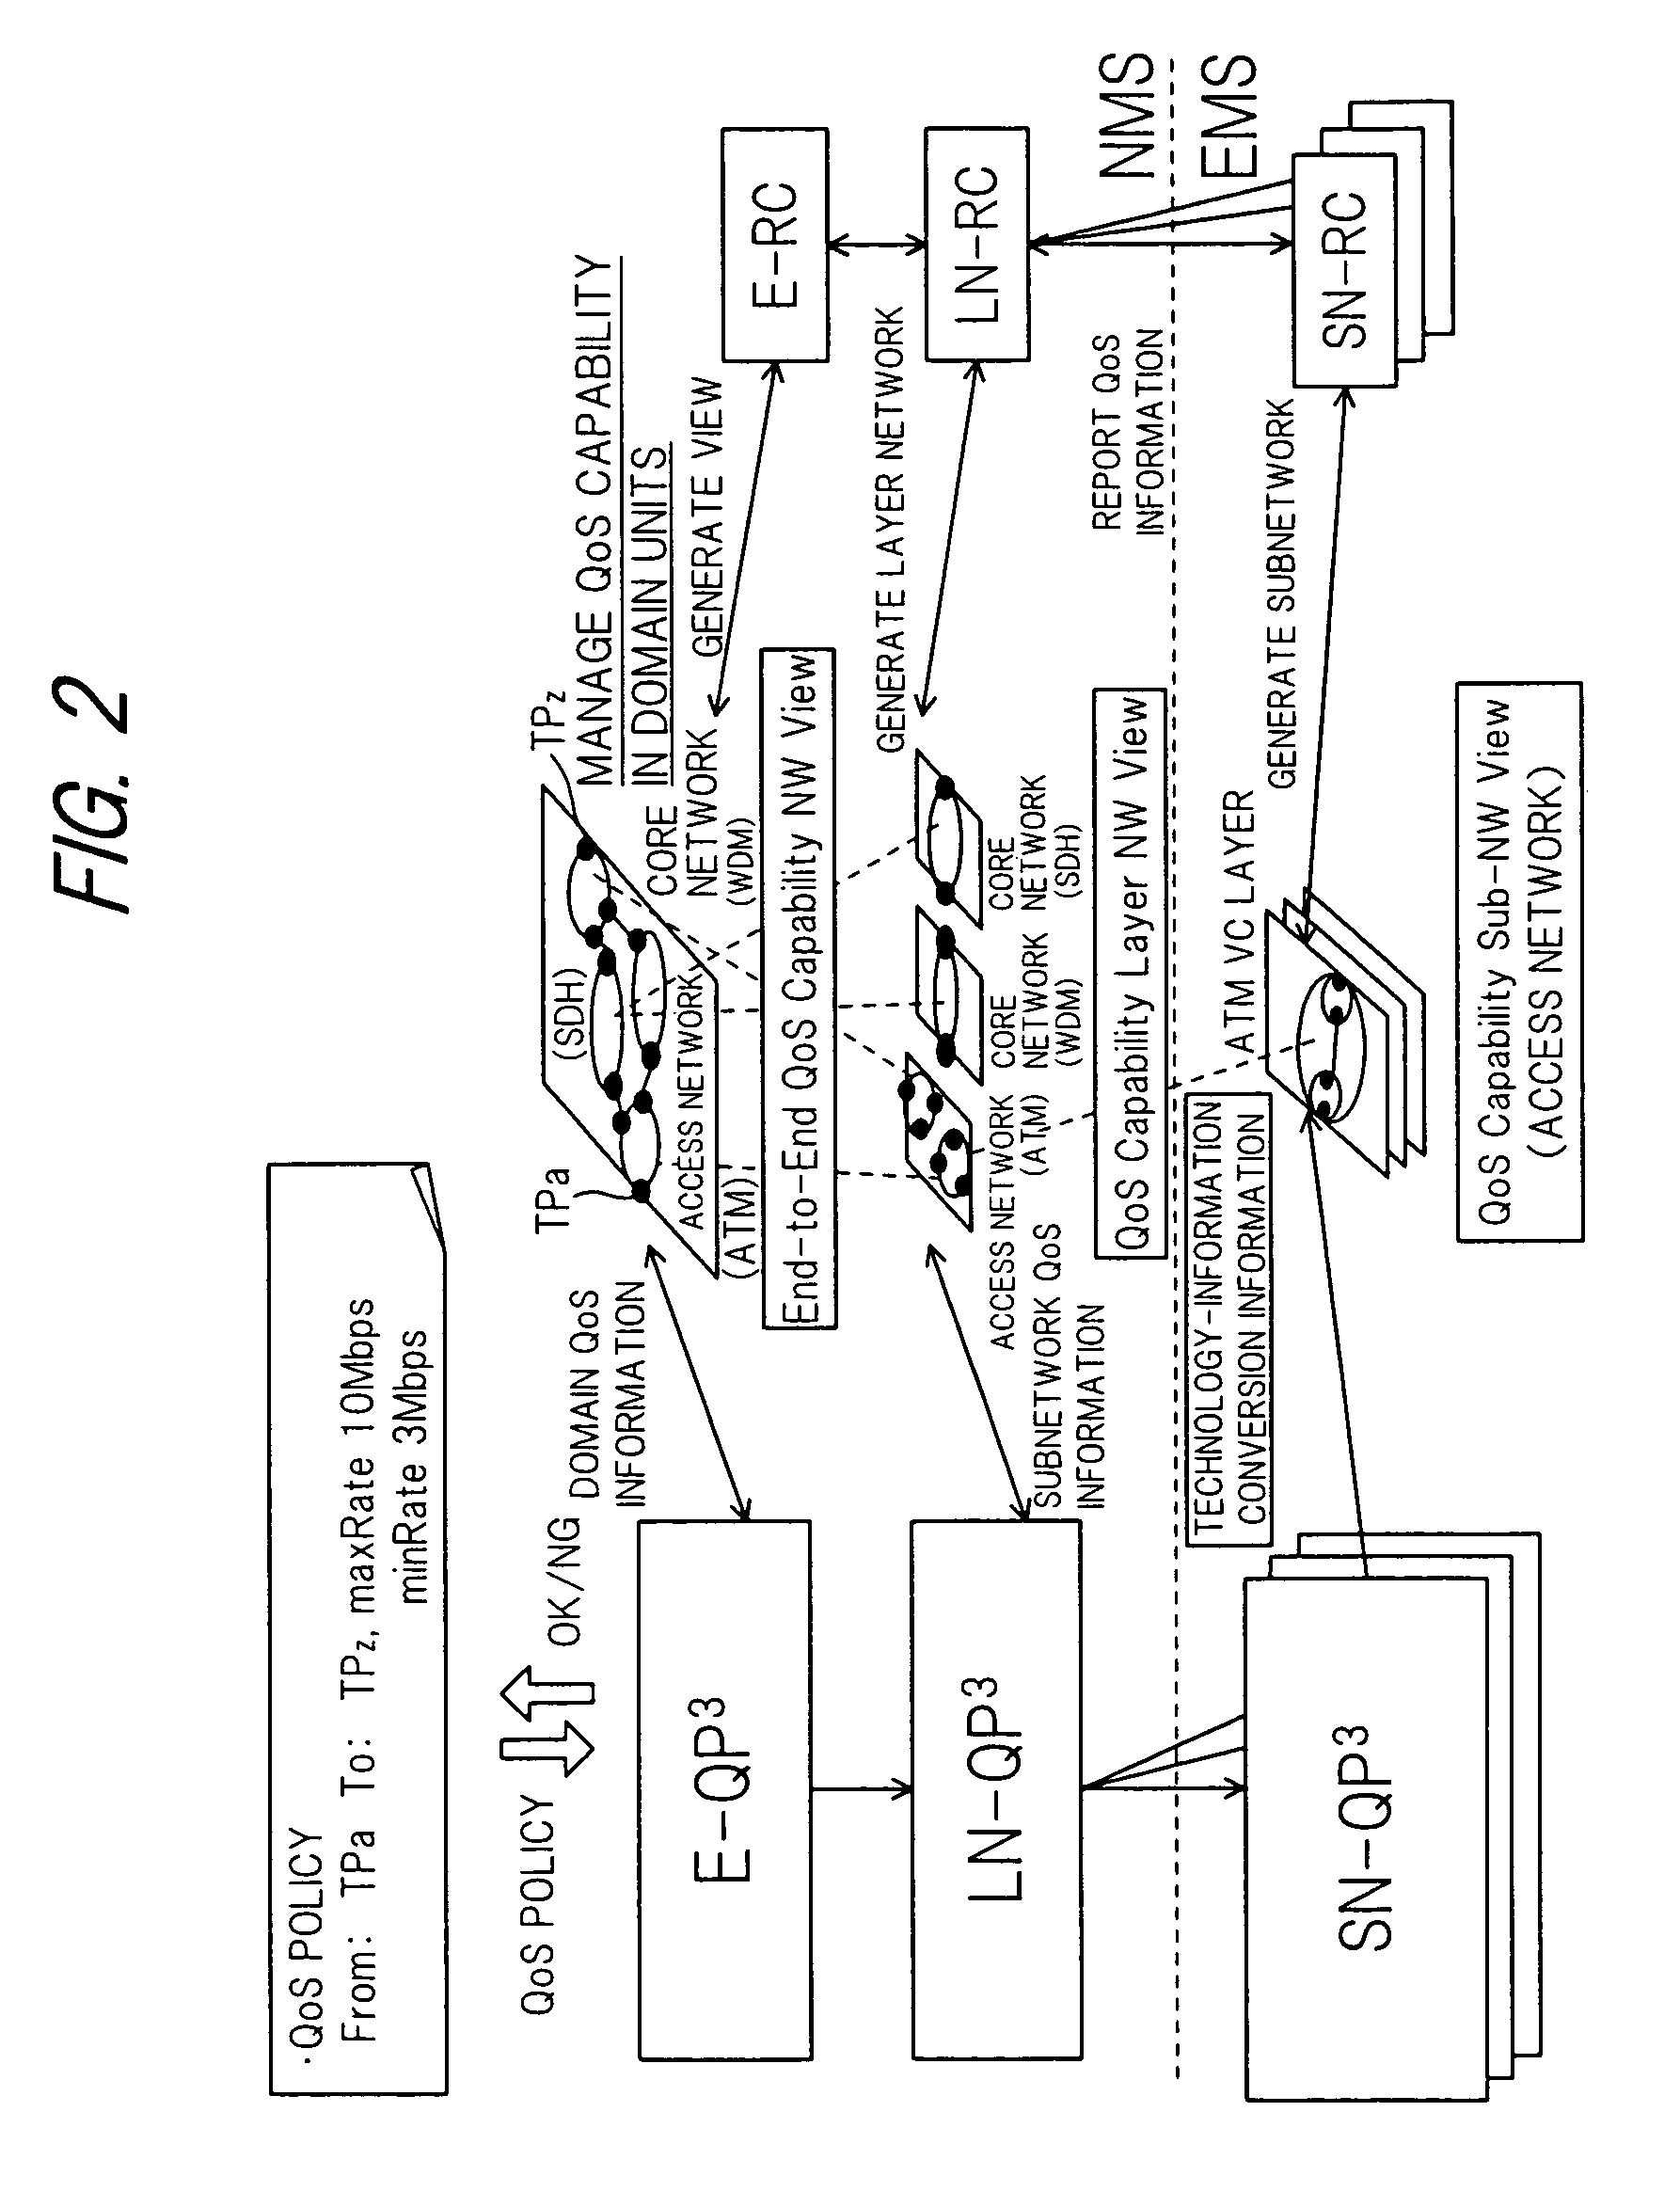 Communication network management system for automatically converting action parameters to network technology dependent parameters using a selected conversion rule conforming to a network technology